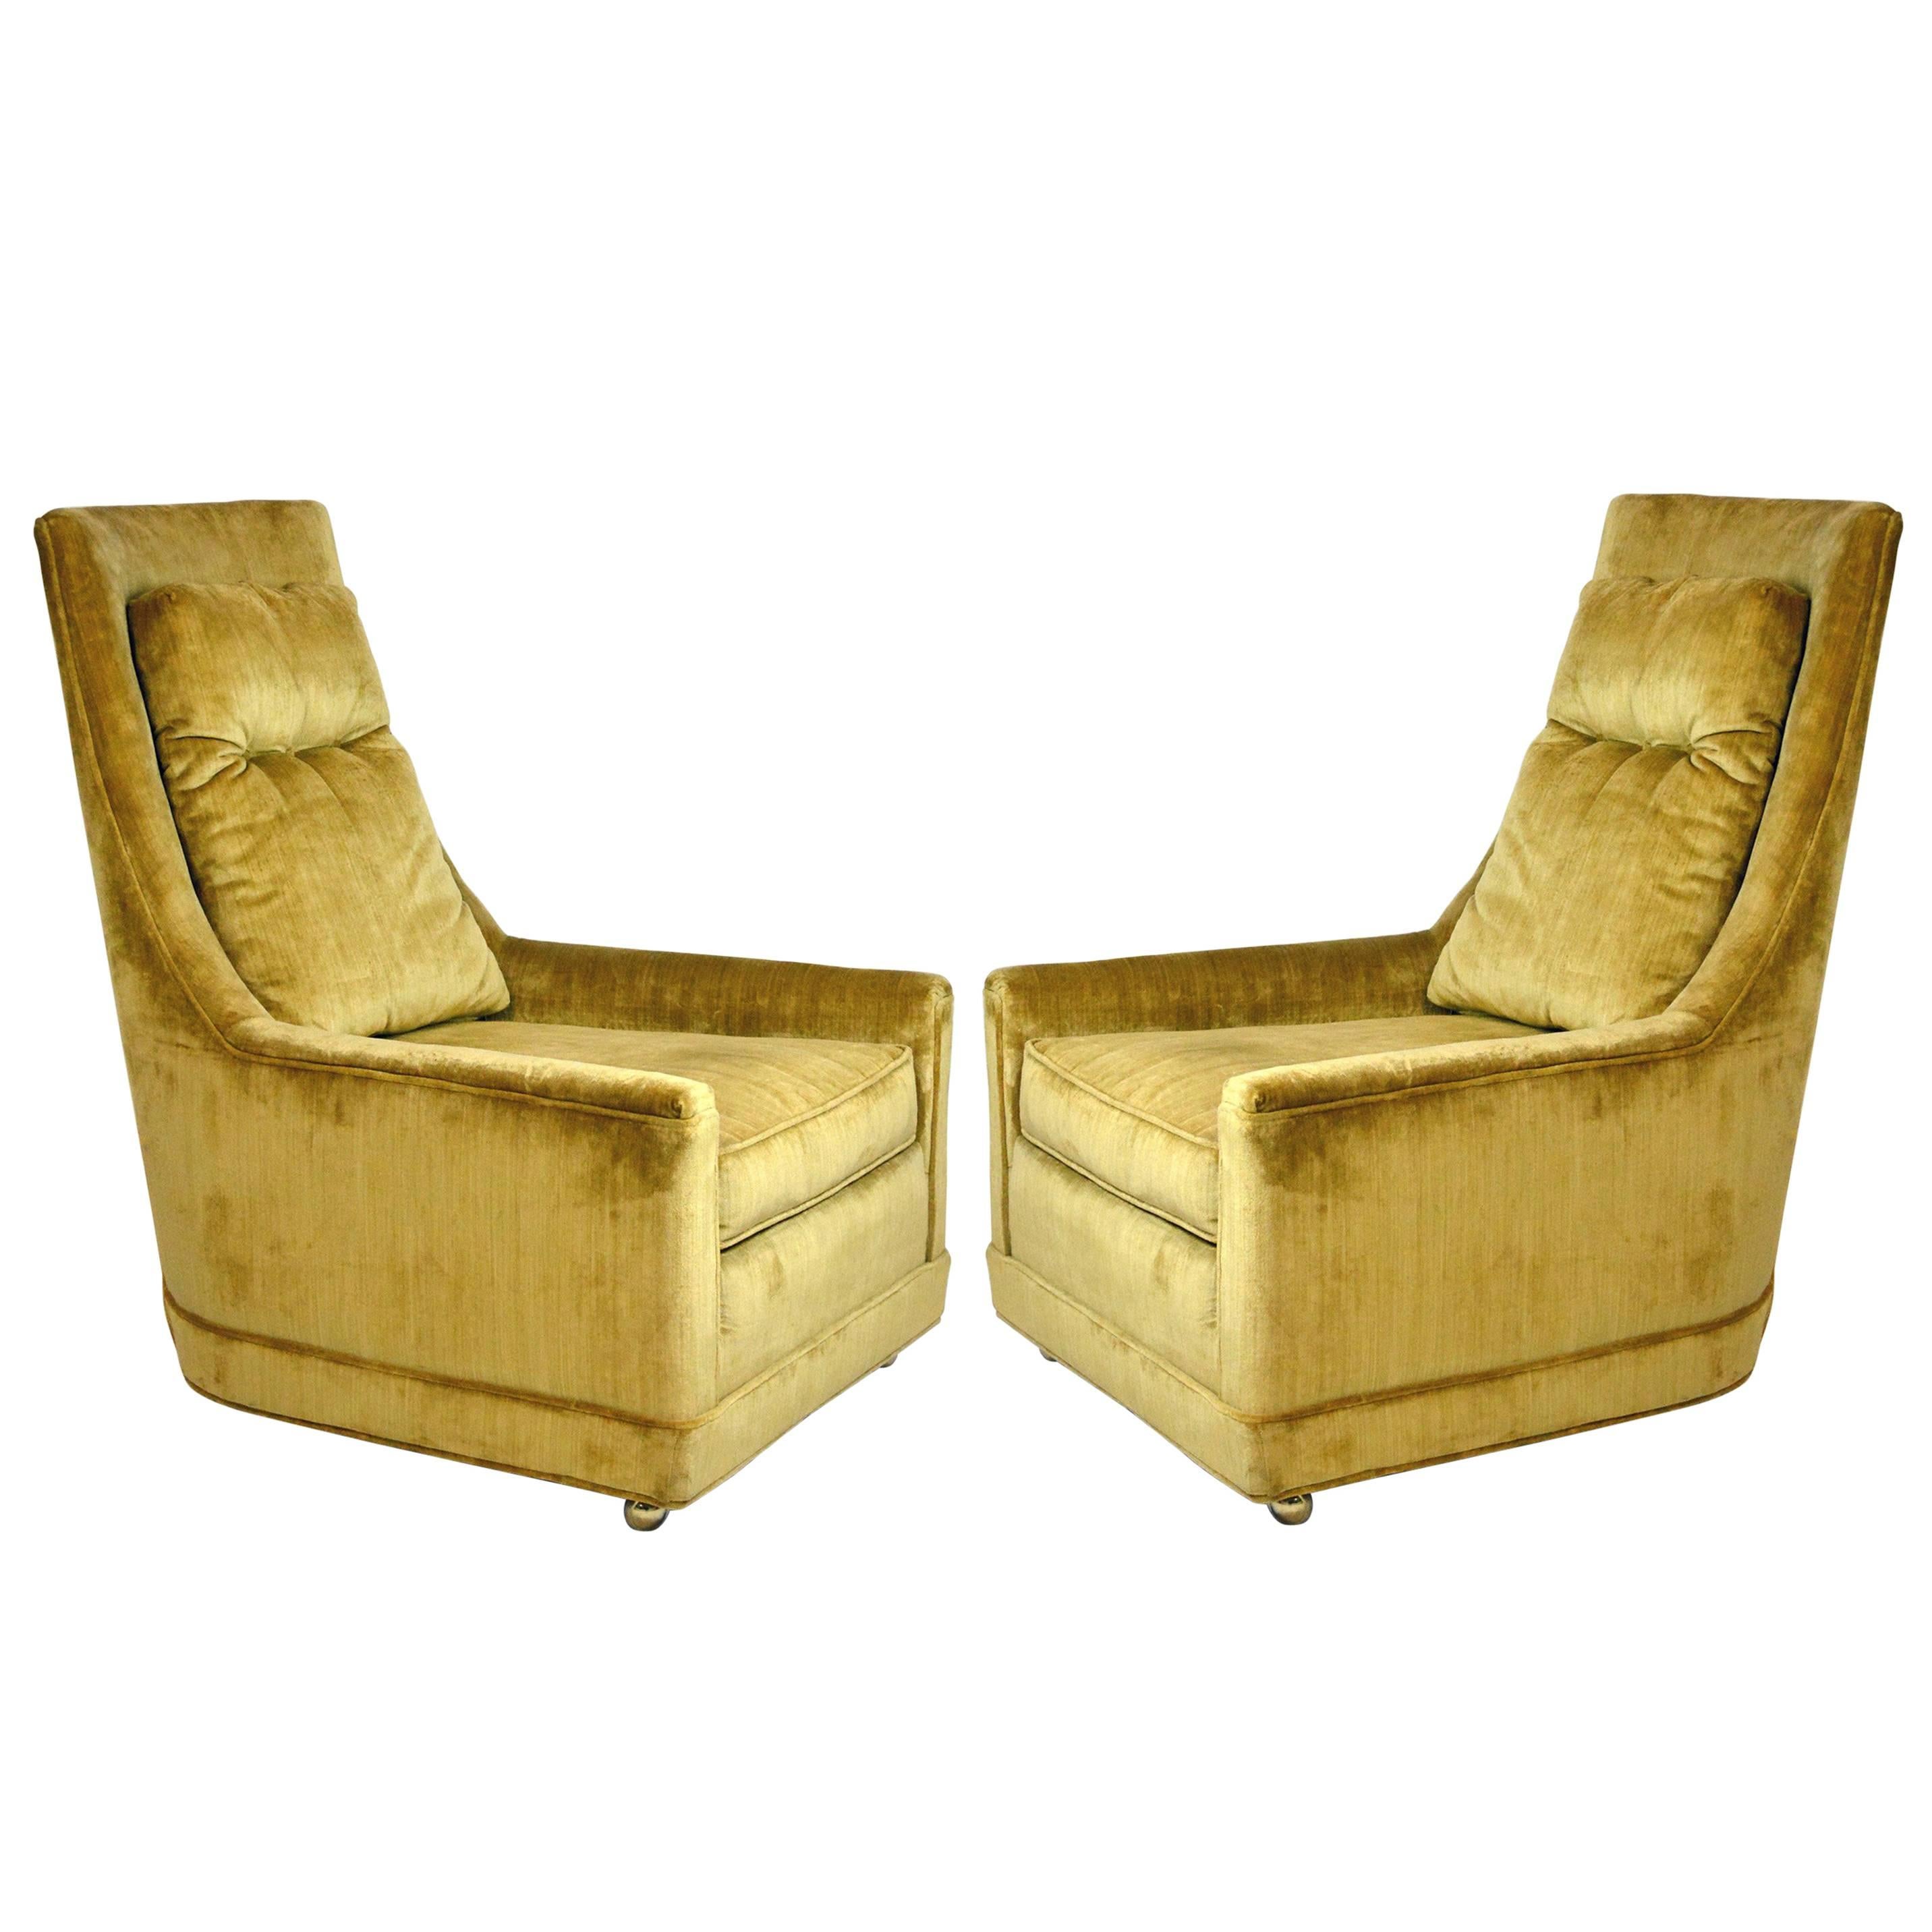 Pair of Hollywood Regency Lounge Chairs